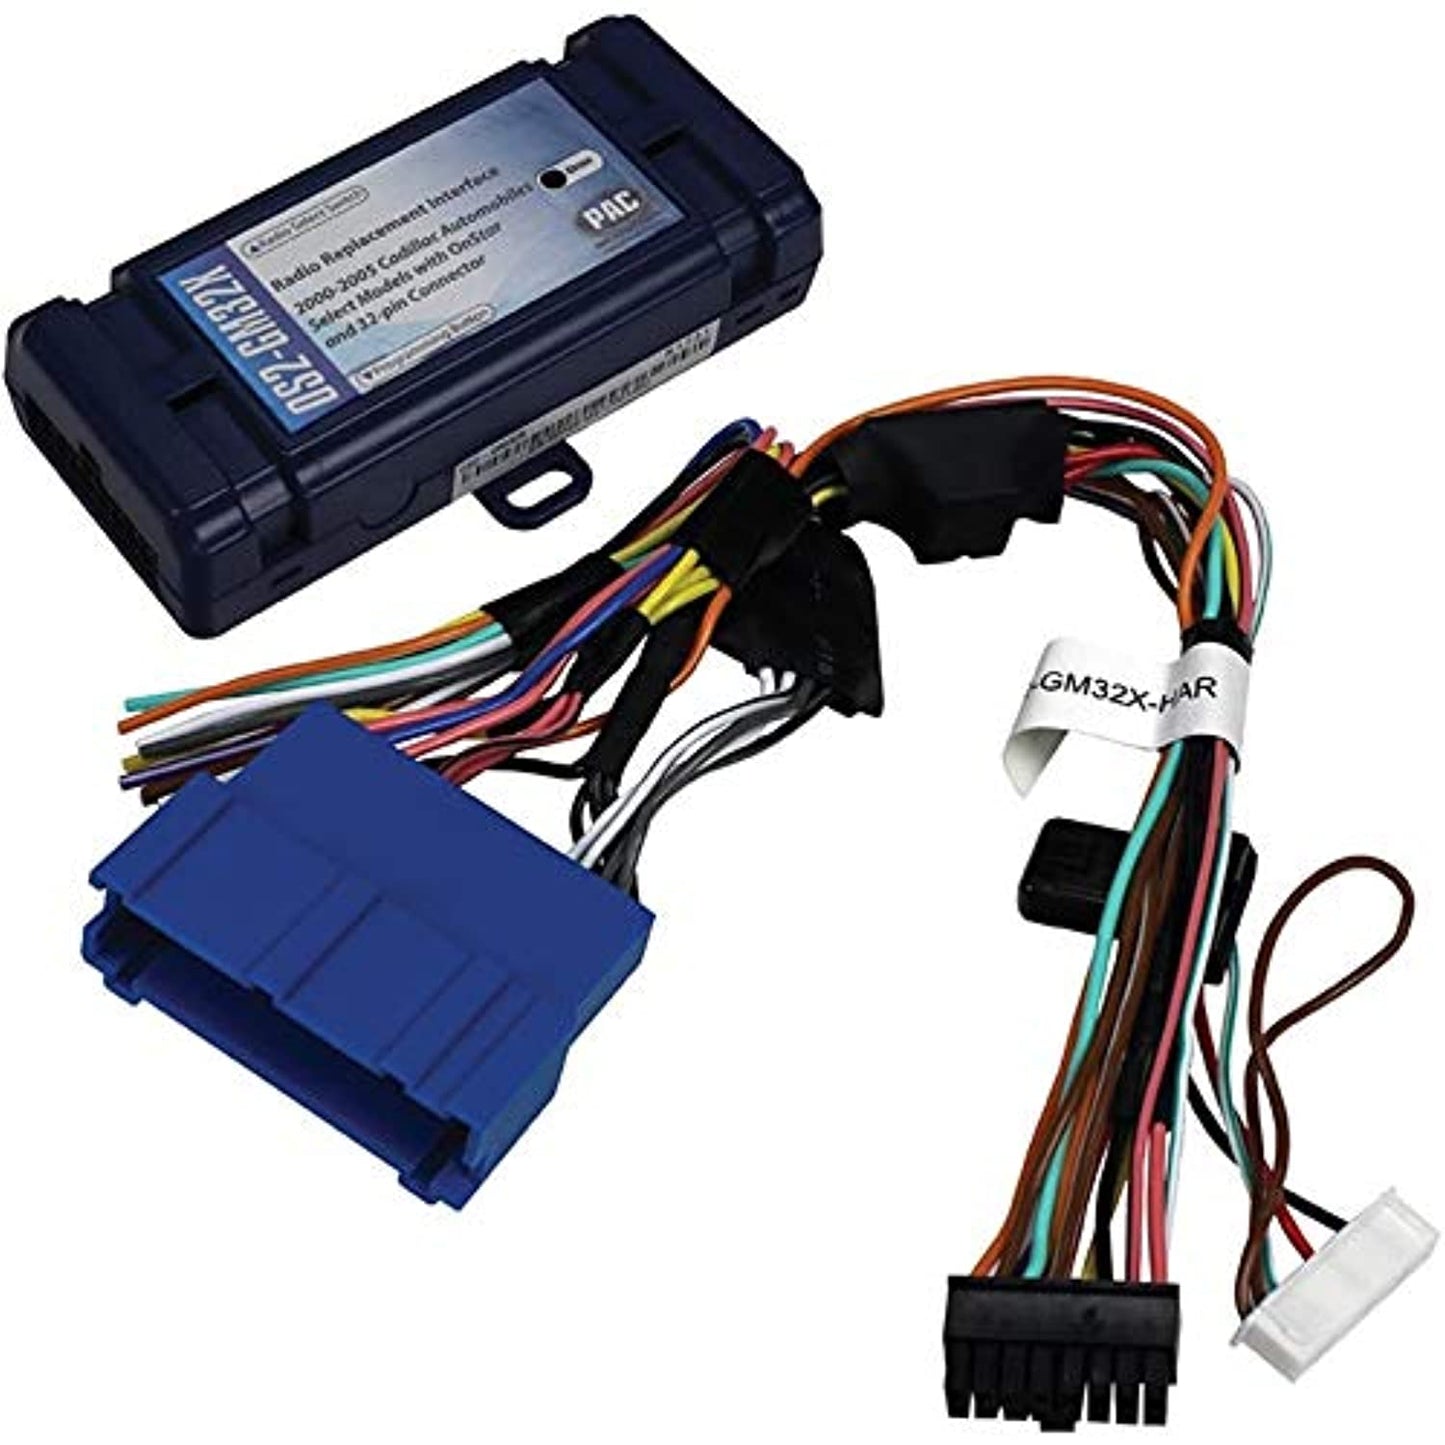 Pac OS2GM32X Onstar Interface for 00-05 Cadillac to Add Aftermarket